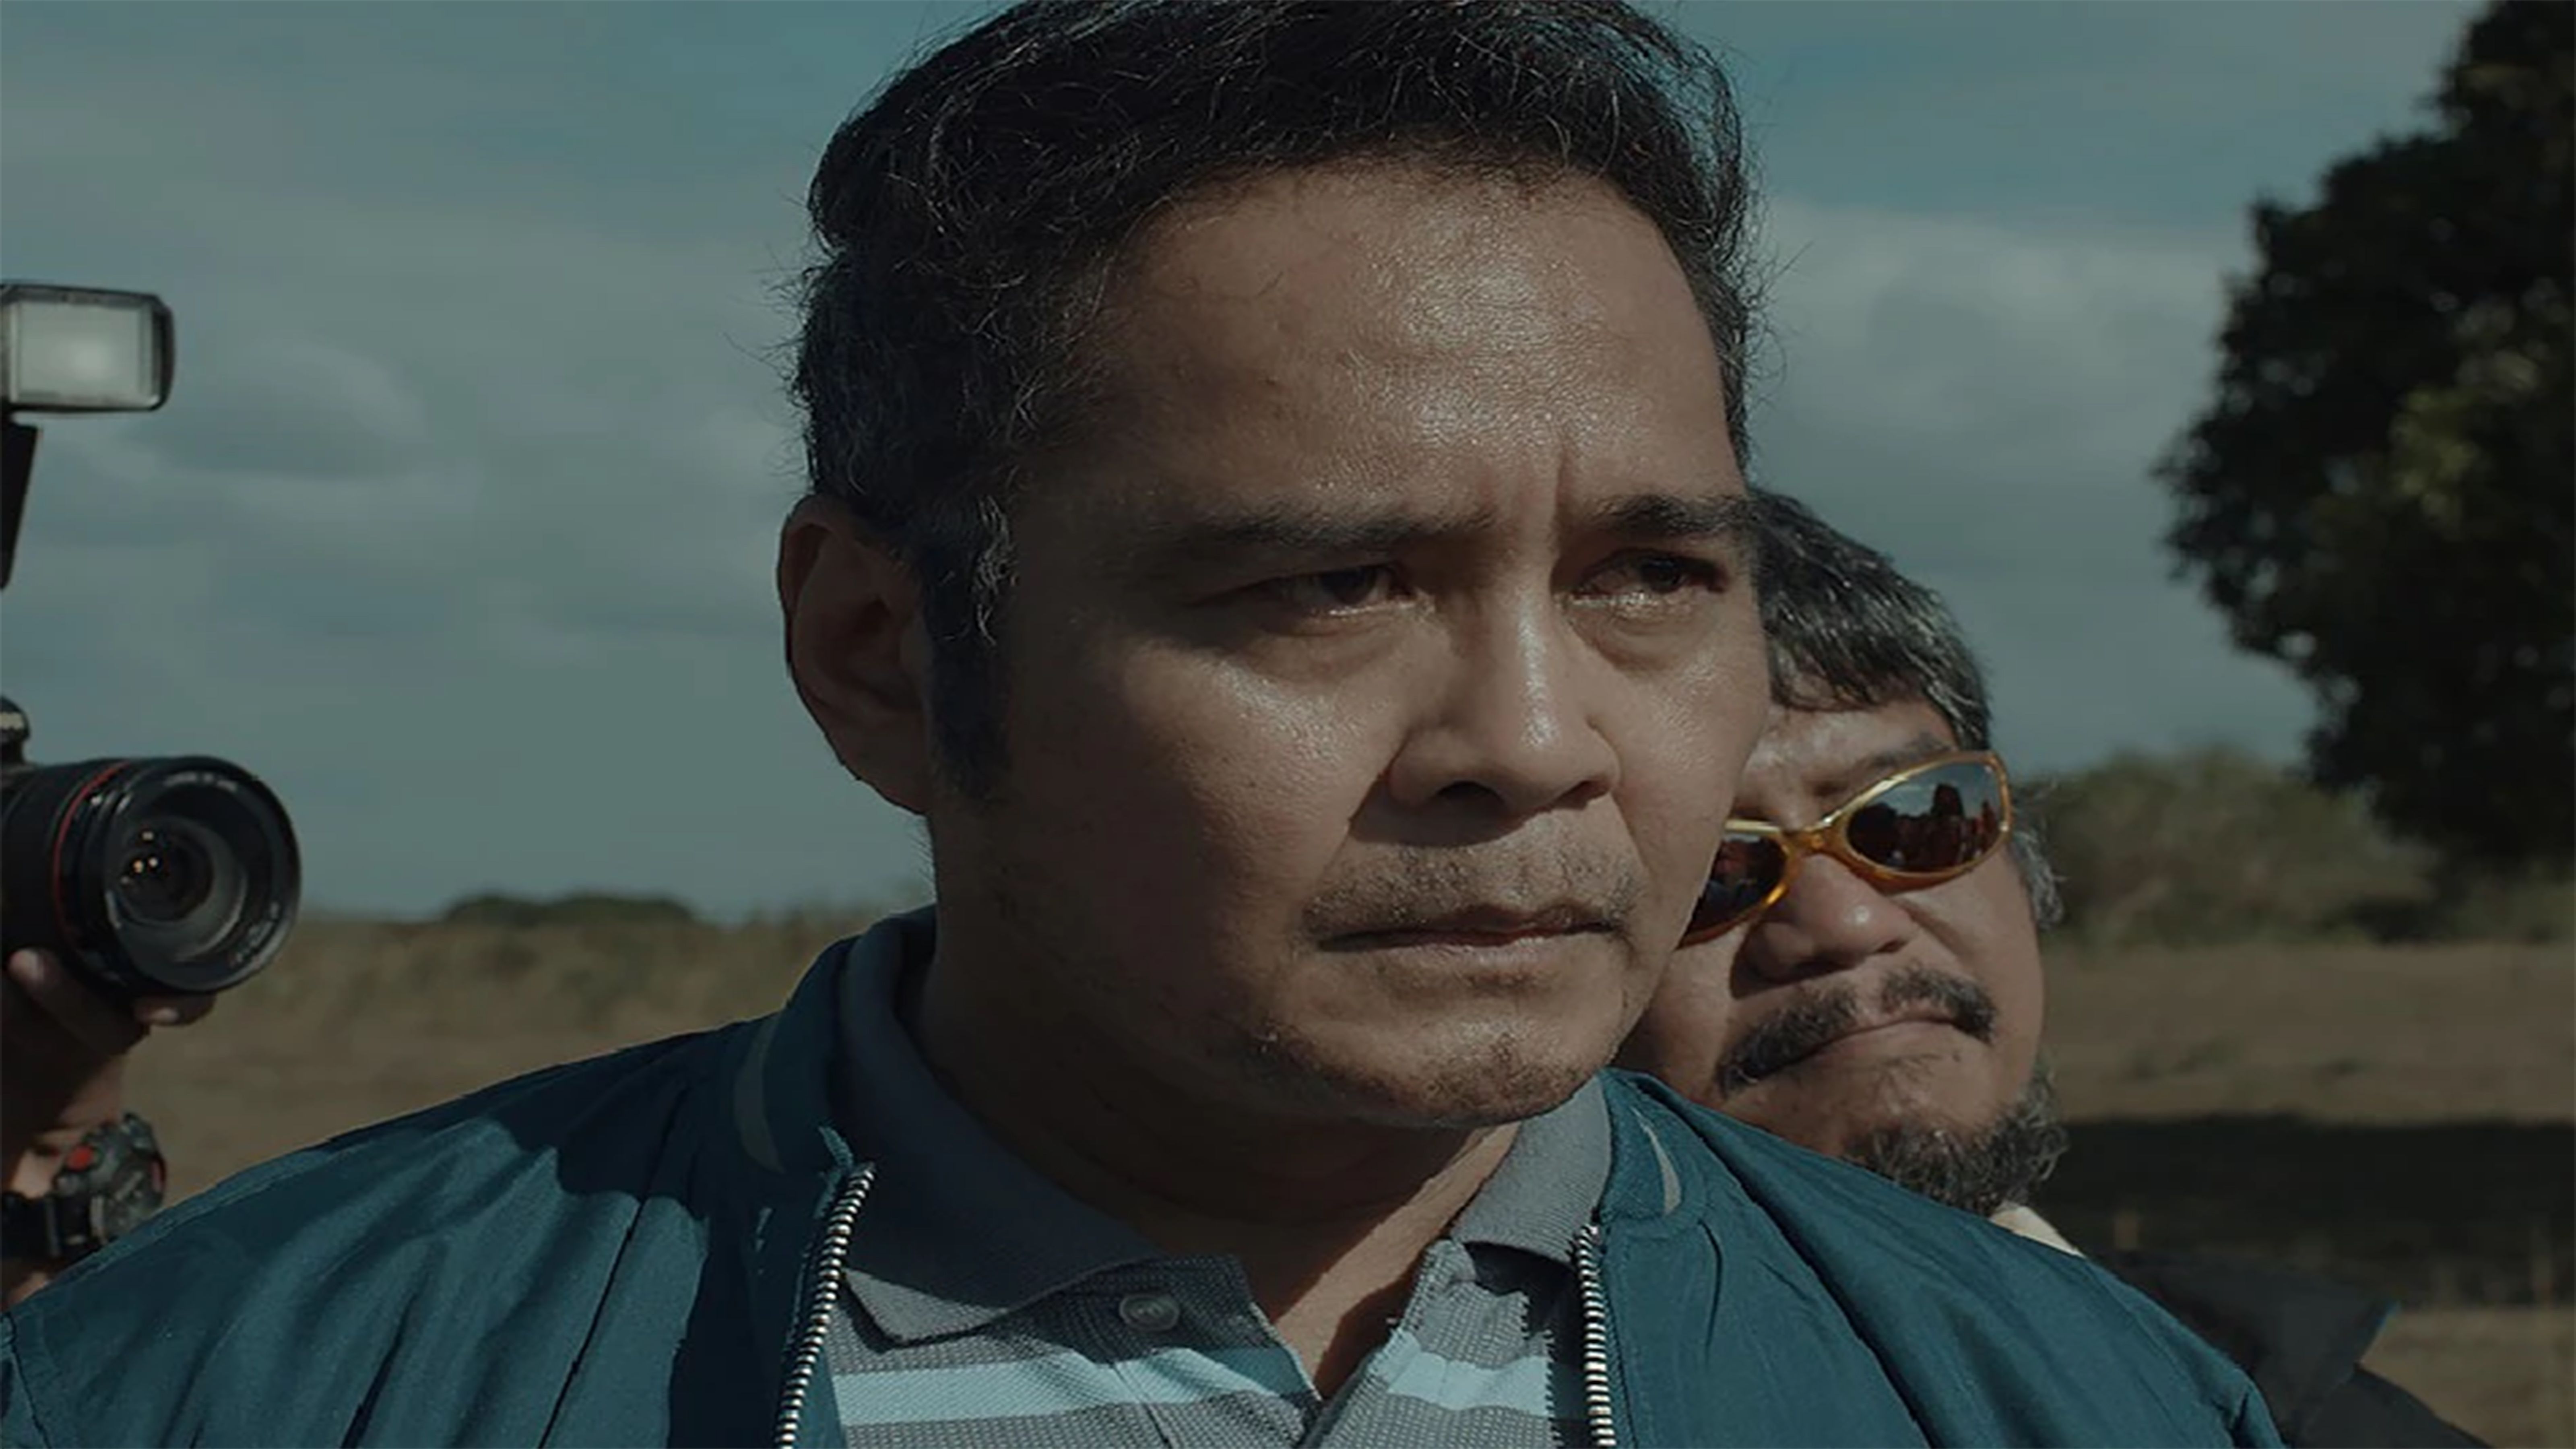 Breaking! John Arcilla wins Volpi Cup Best Actor at 2021 Venice International Film Festival photo from ABS-CBN News